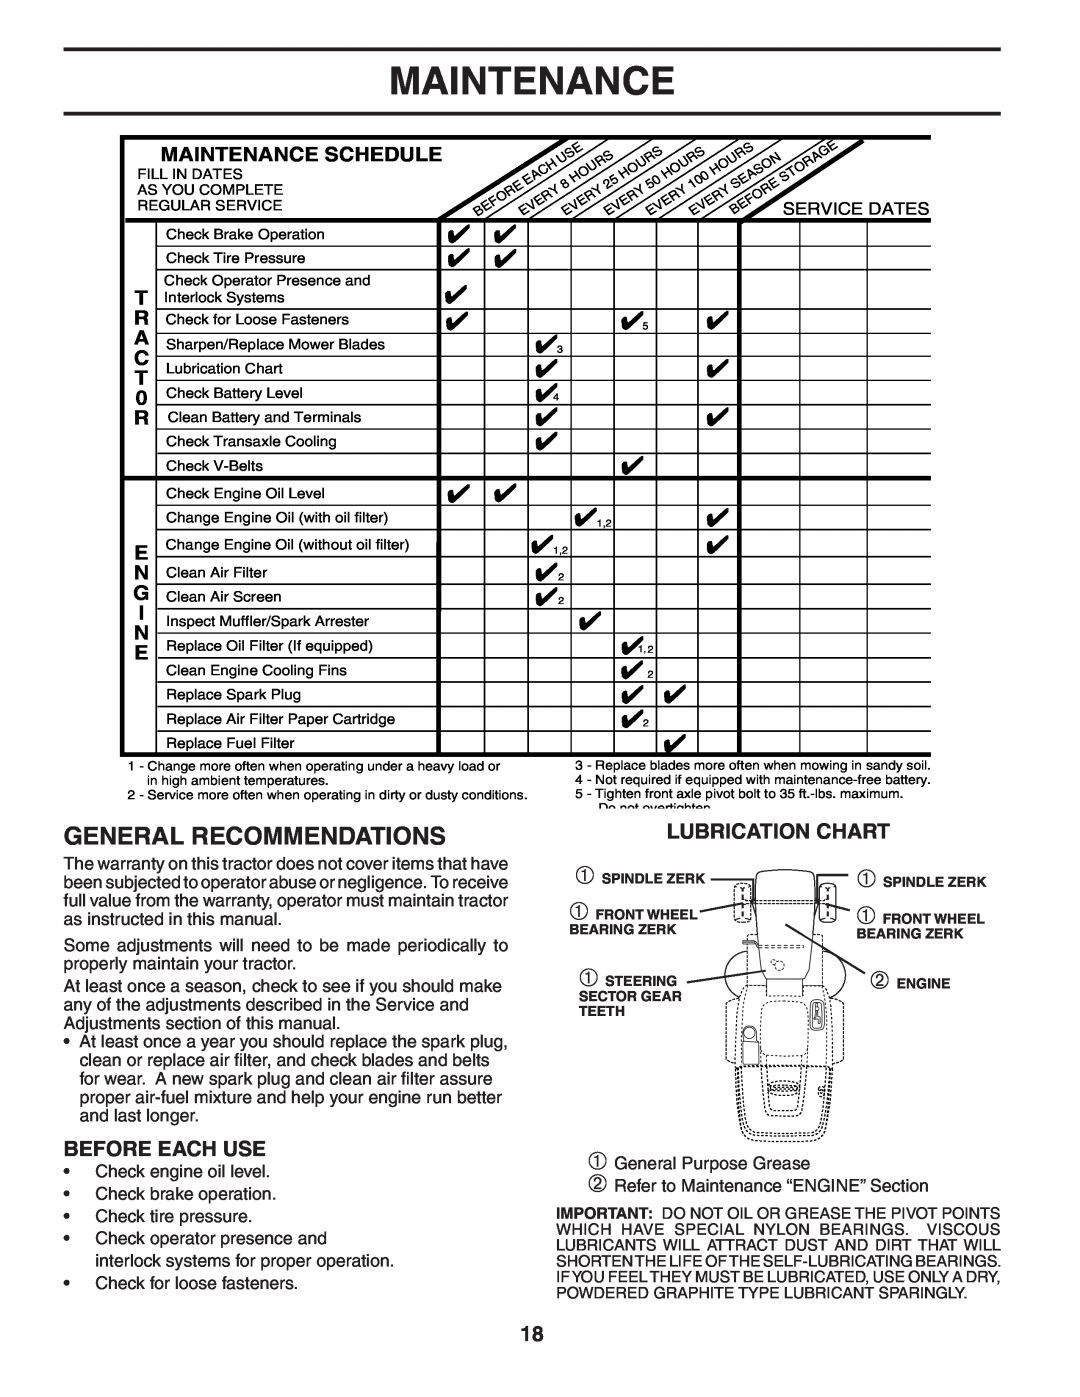 Husqvarna CTH180 XP owner manual General Recommendations, Lubrication Chart, Before Each Use, Maintenance Schedule 